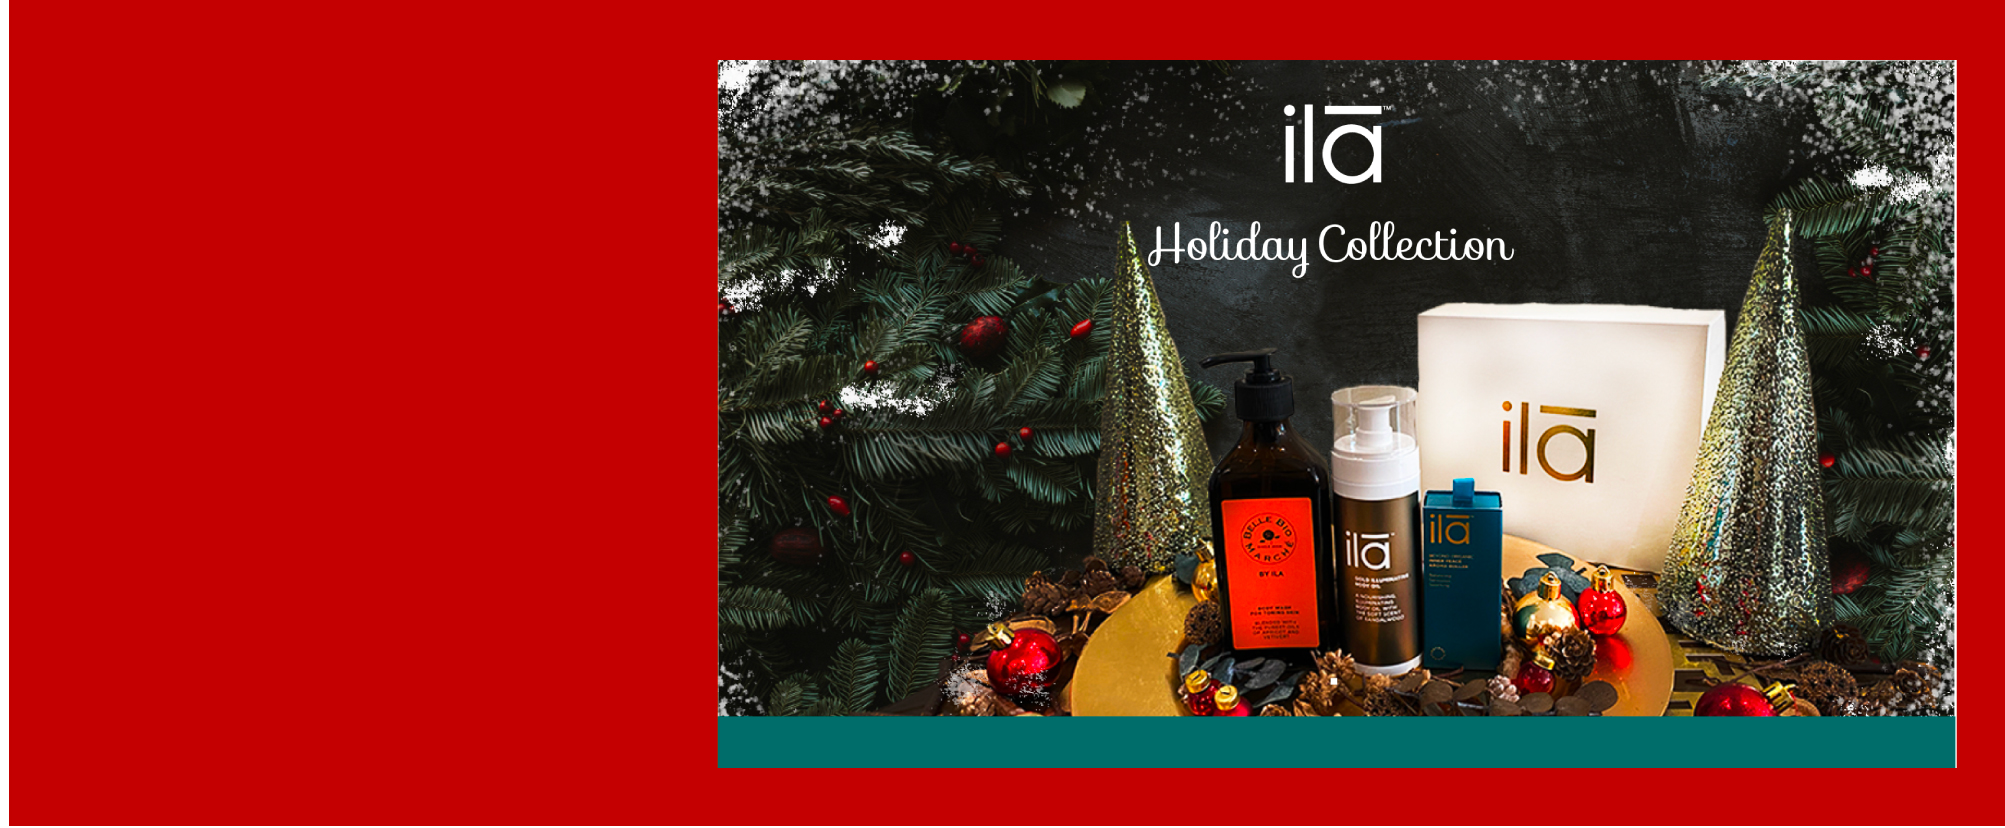 ila Holiday Limited Collection